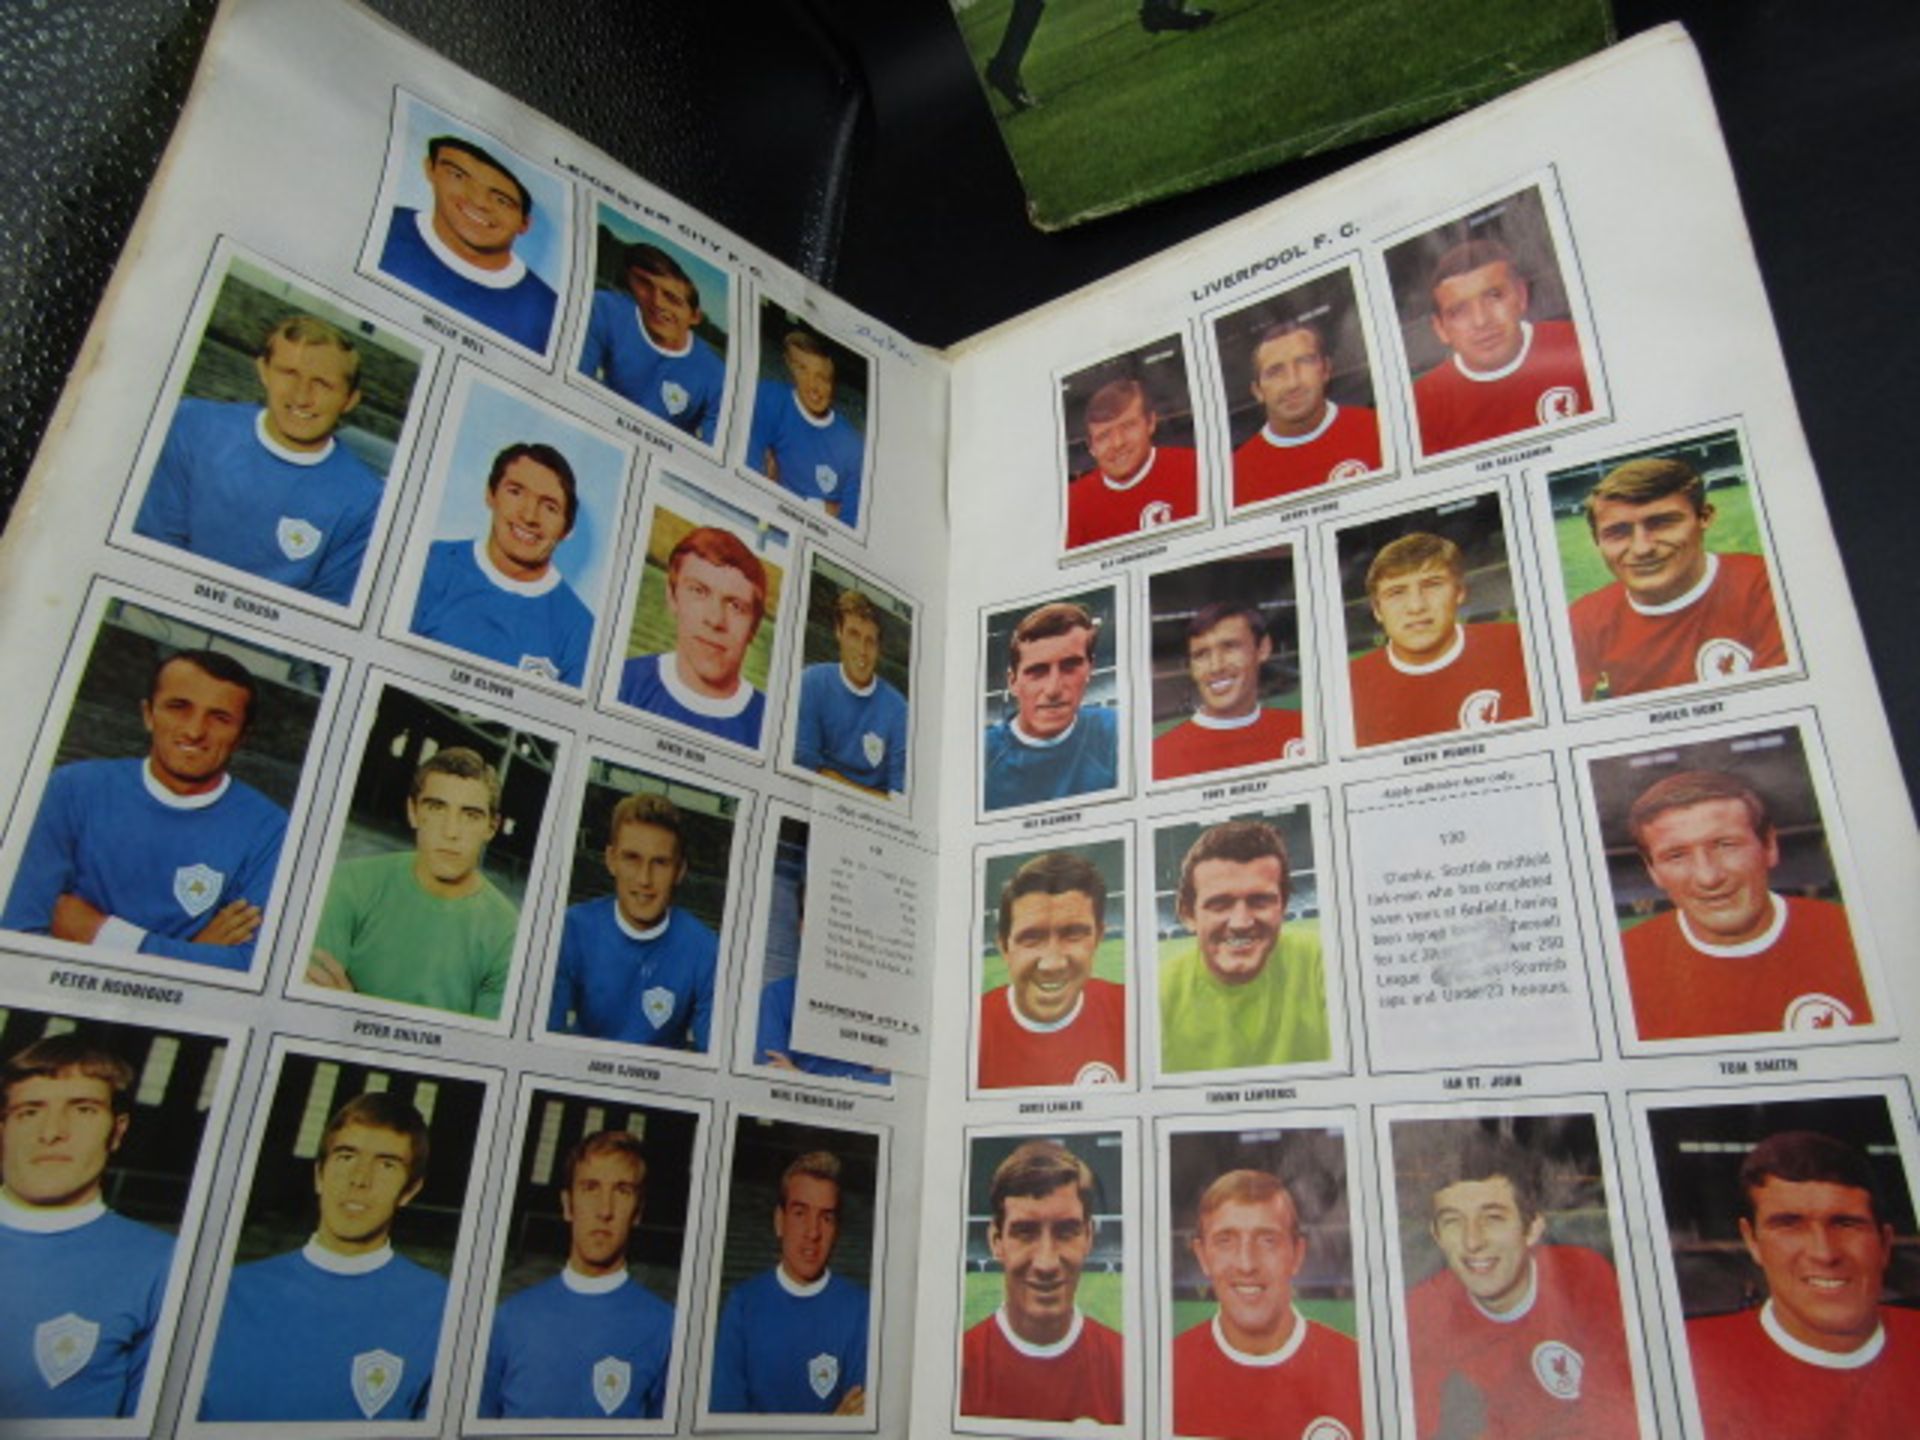 Leeds football shirt, Norwich City autograph sheet 1971-2 plus album picture stamp album and - Image 9 of 16